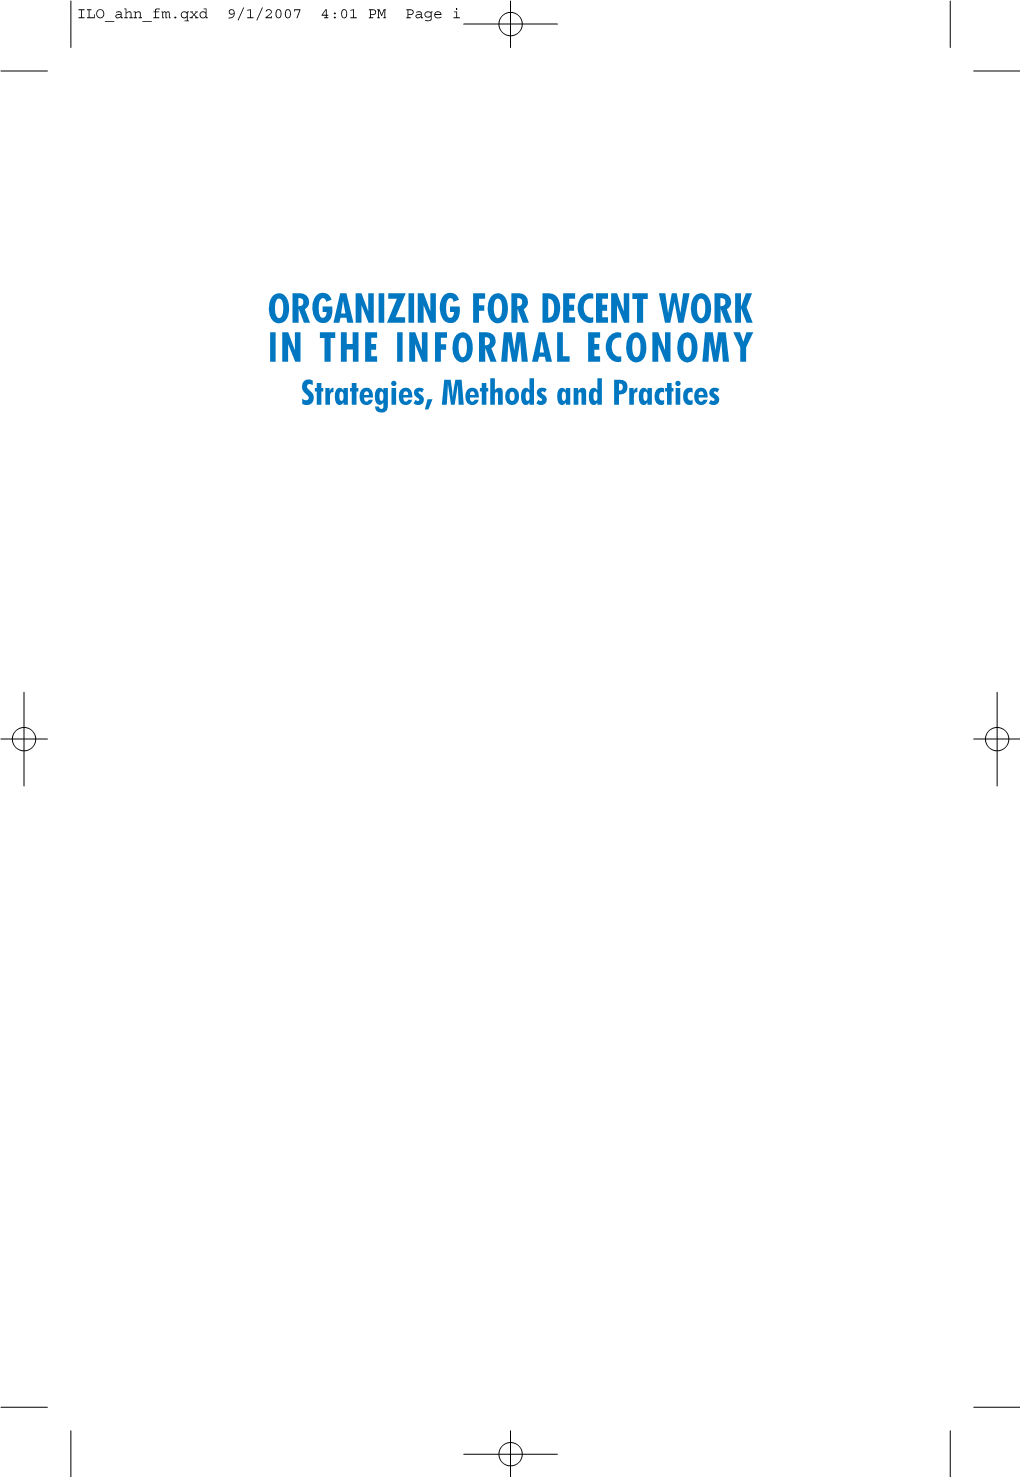 ORGANIZING for DECENT WORK in the INFORMAL ECONOMY Strategies, Methods and Practices ILO Ahn Fm.Qxd 9/1/2007 4:01 PM Page Ii ILO Ahn Fm.Qxd 9/1/2007 4:01 PM Page Iii